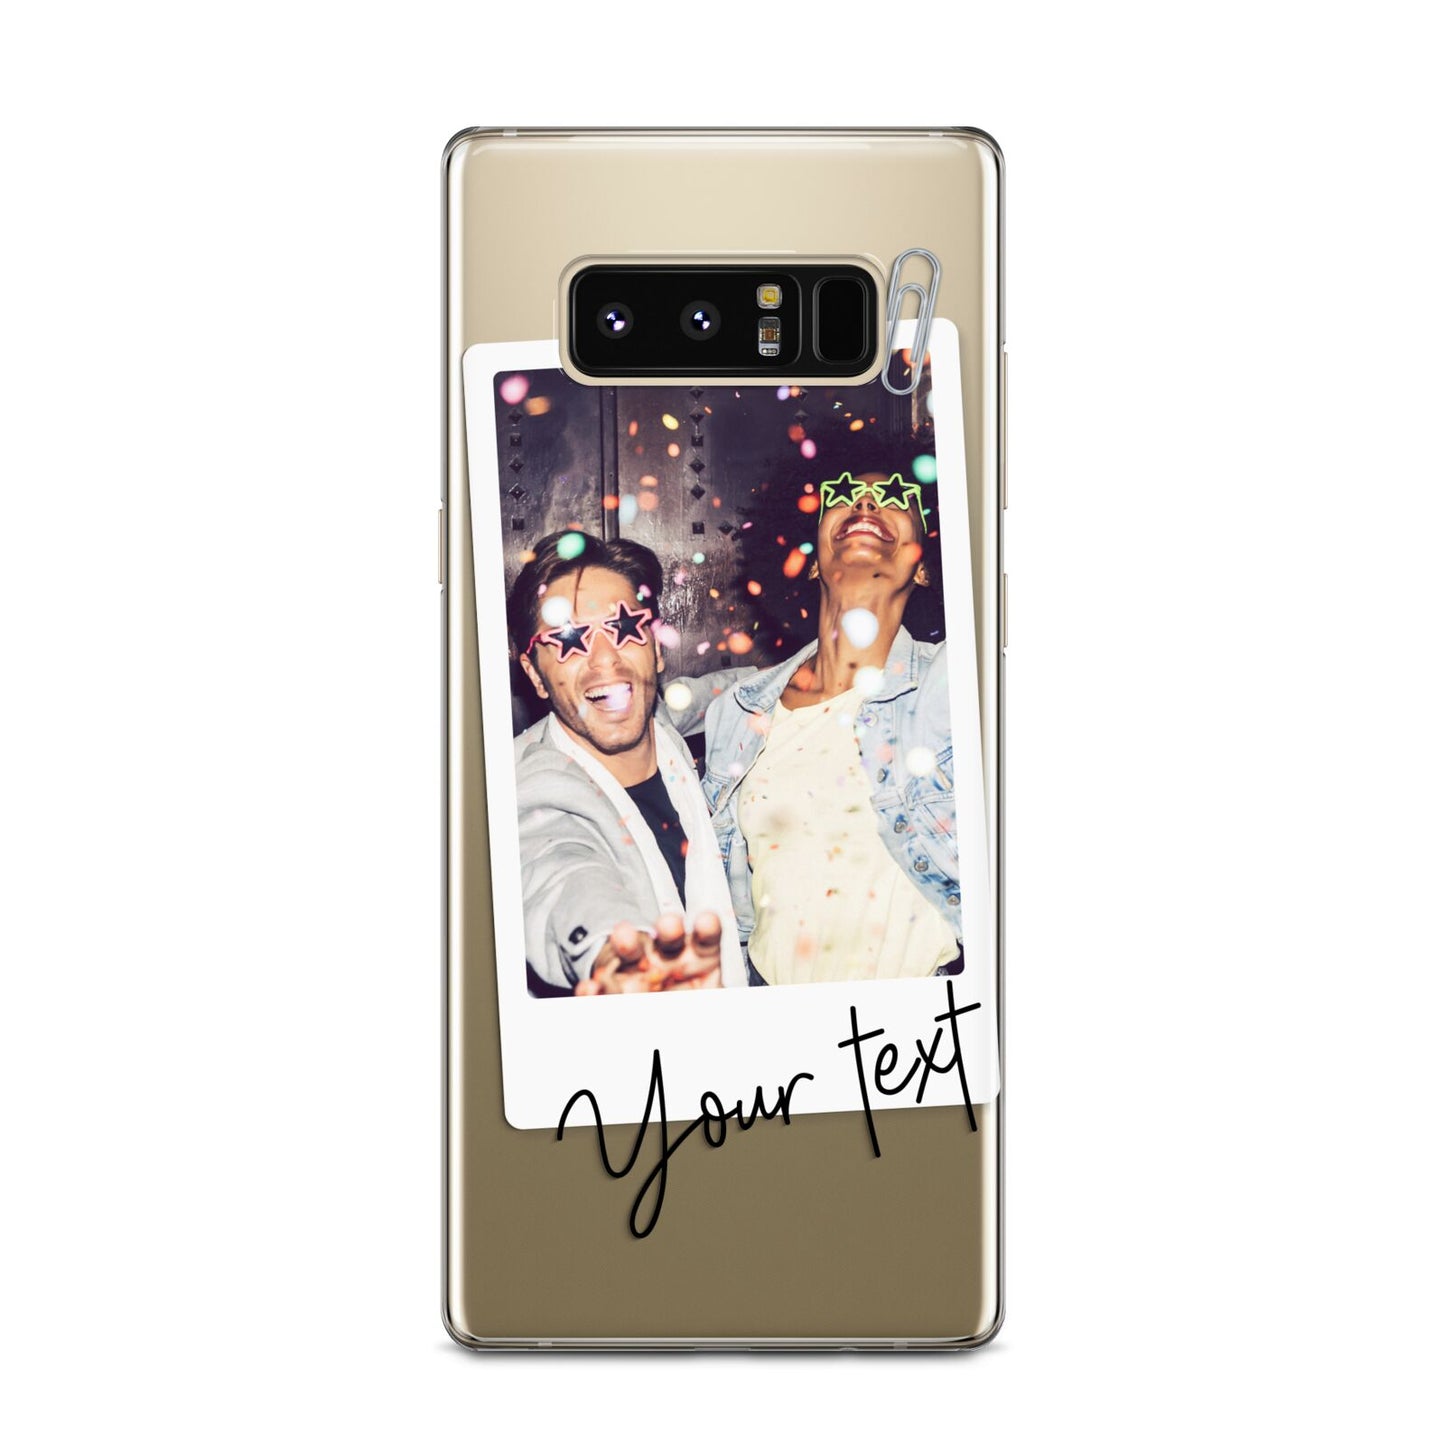 Personalised Photo with Text Samsung Galaxy Note 8 Case